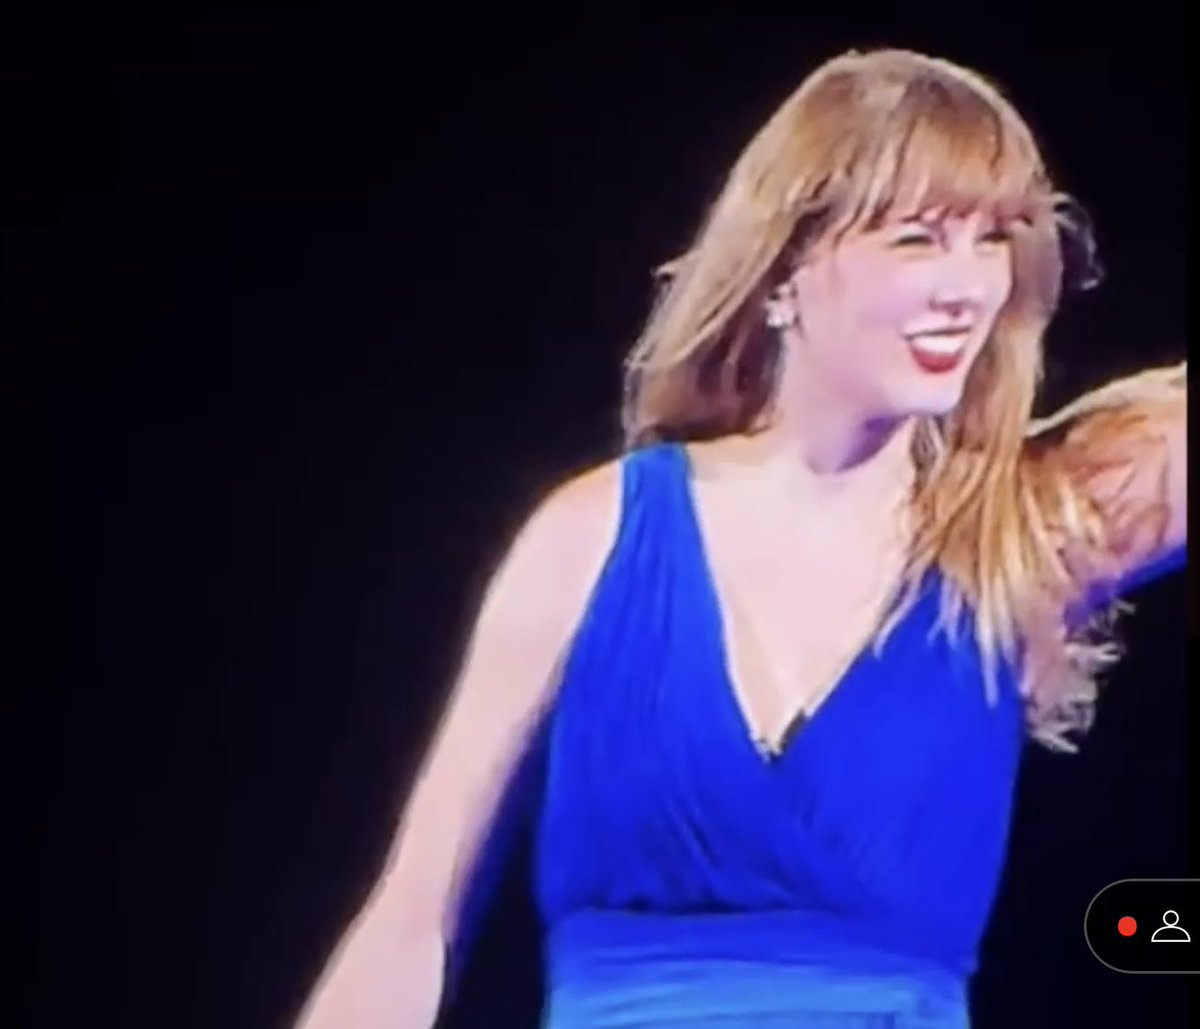 taylors huge smile after playing a sad song should tell you everything you need to know